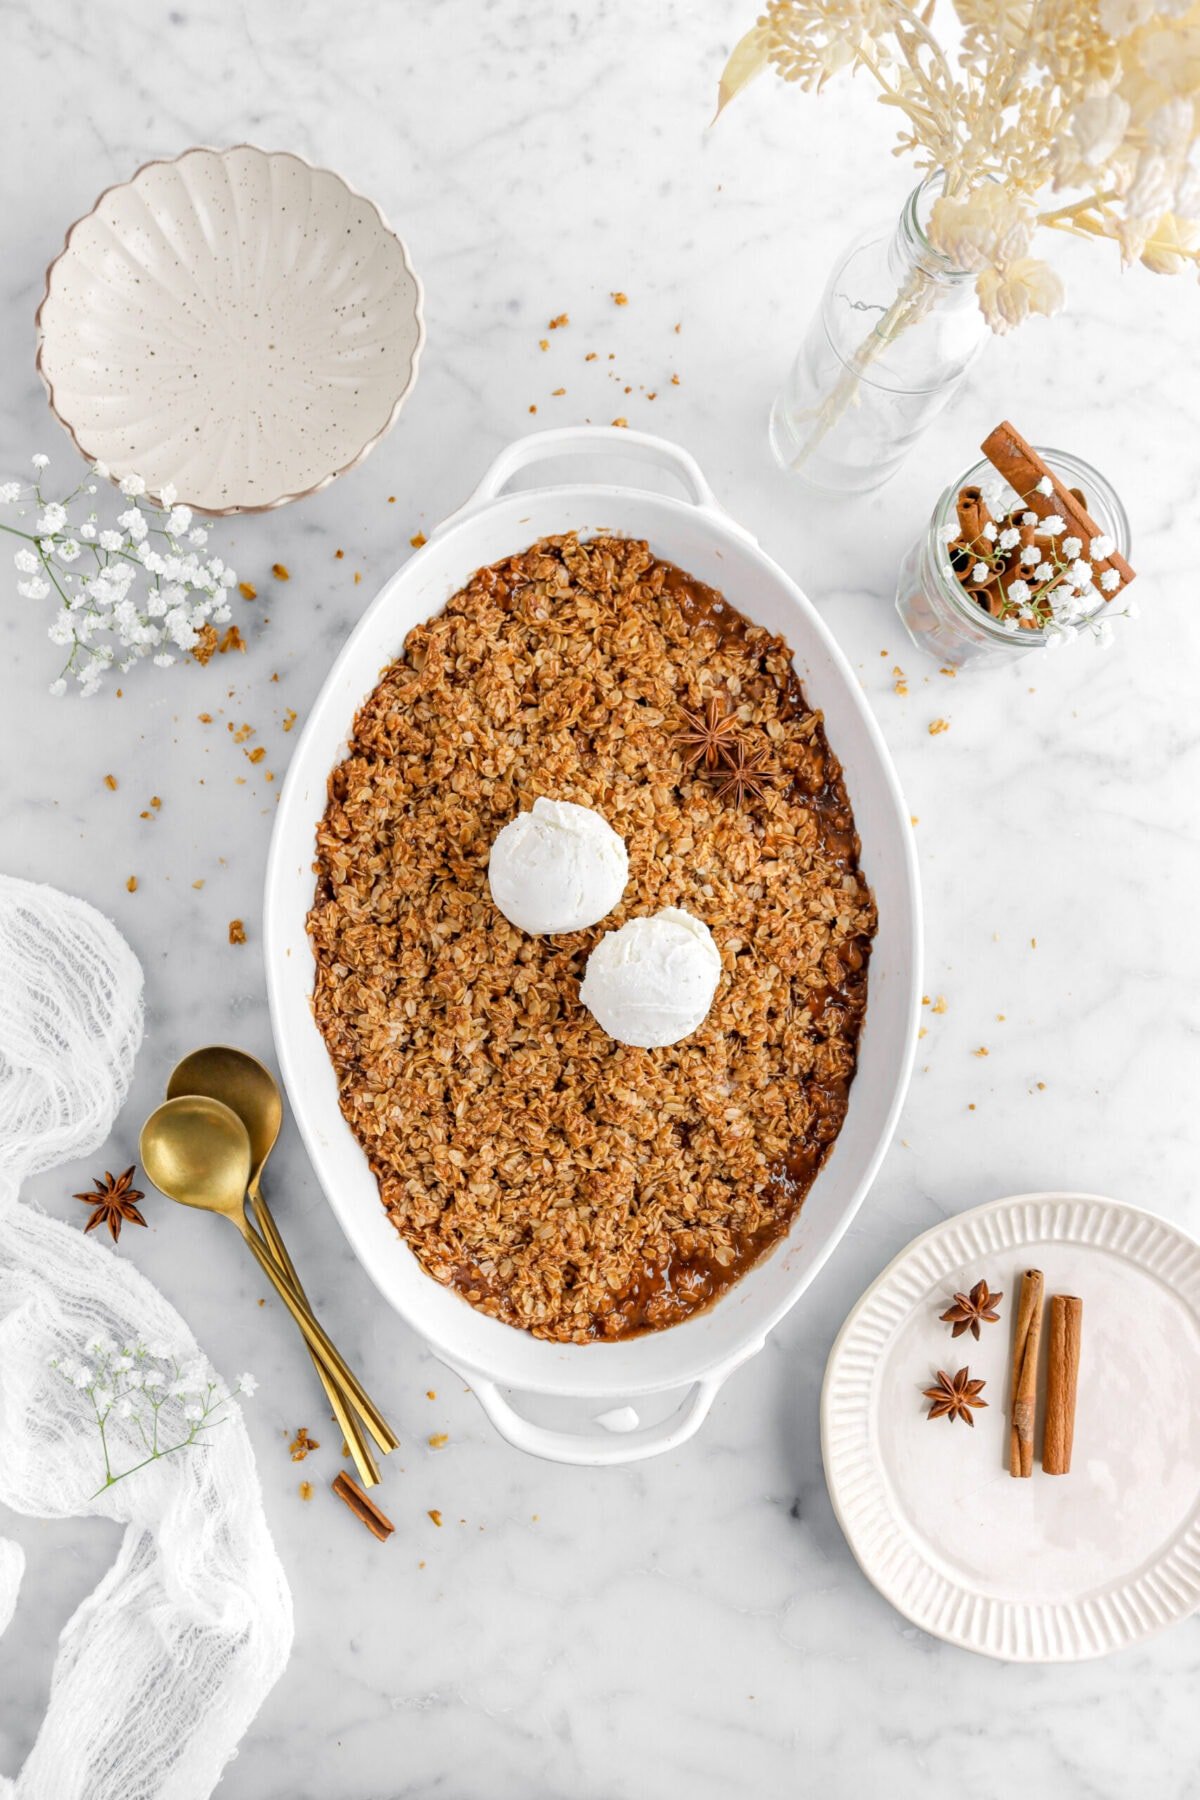 apple crisp with two scoops of ice cream on top with a plate, whole spices, and an empty bowl around on marble surface with two gold spoons beside.